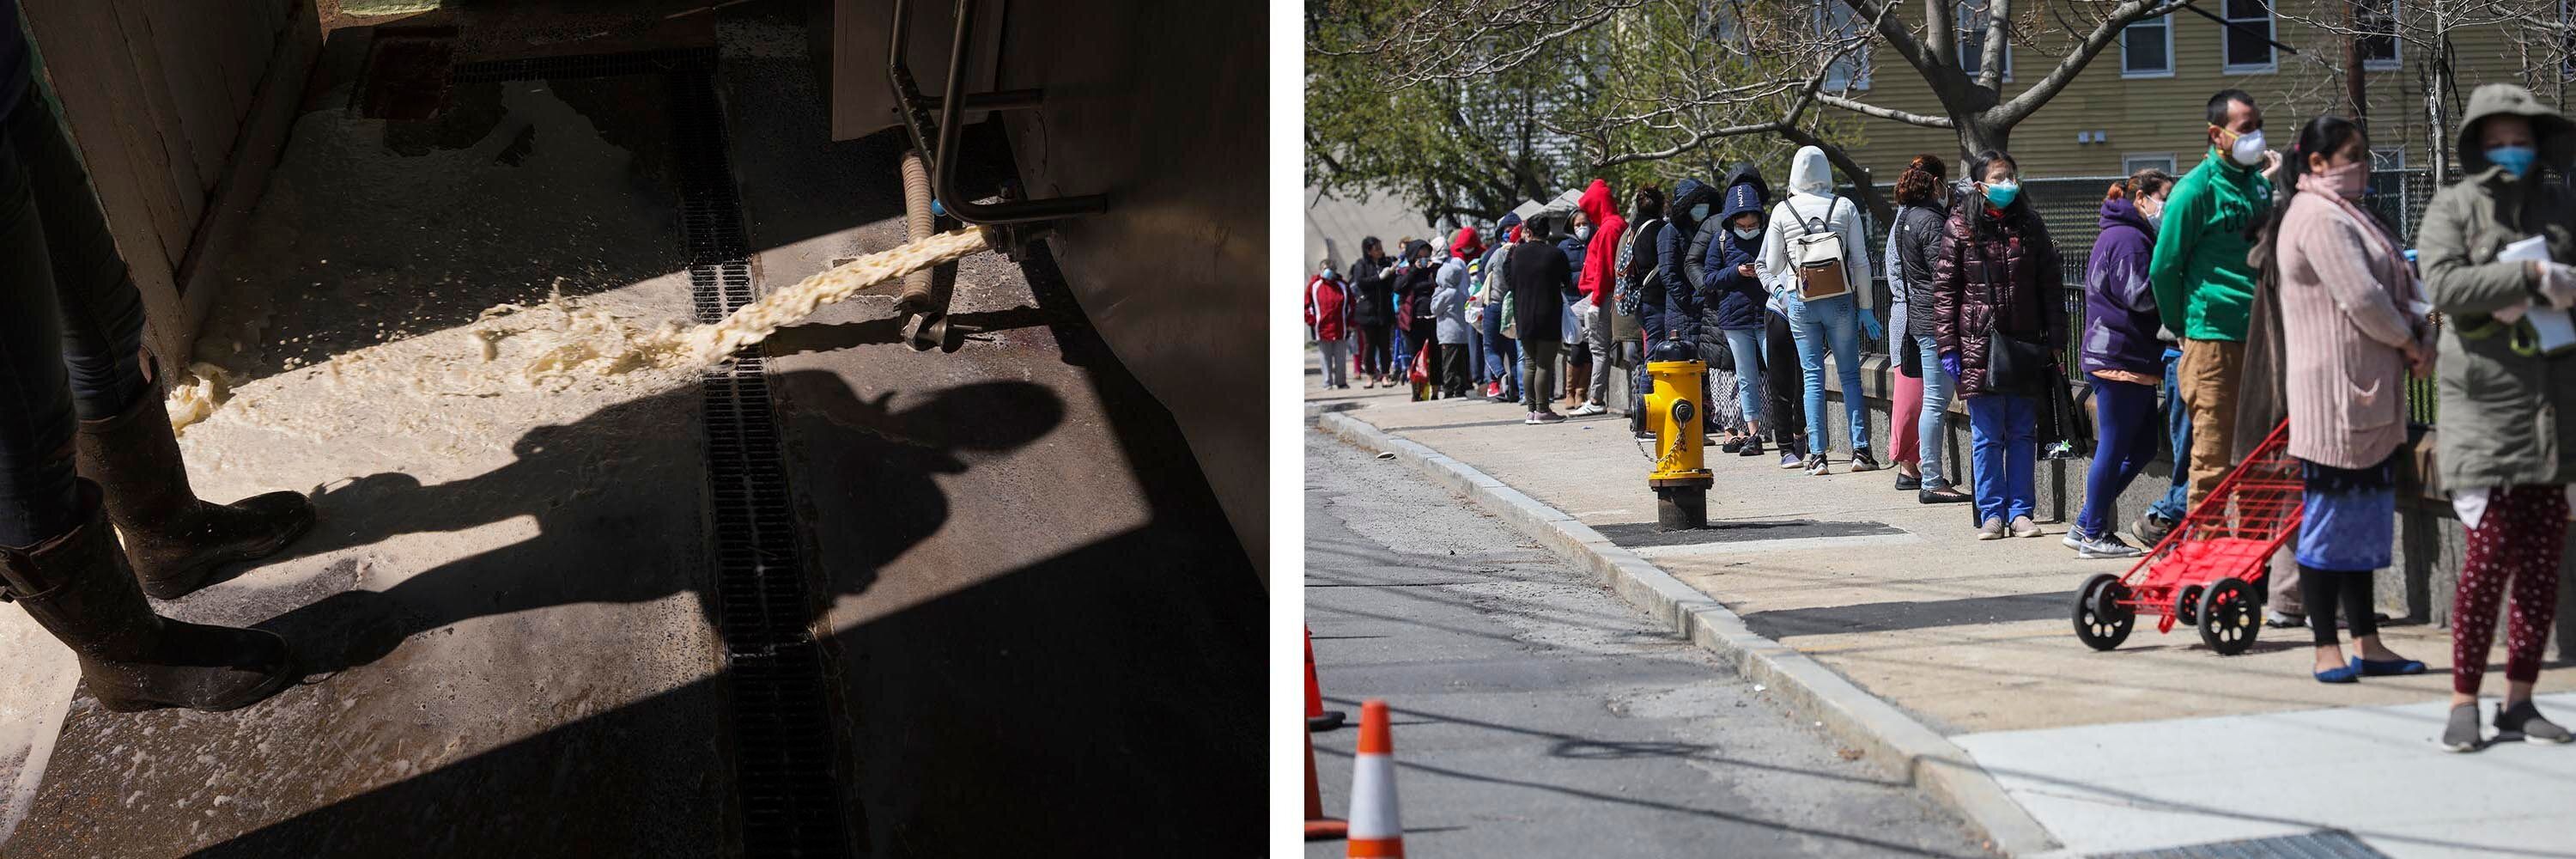 Left: A dairy farmer dumps excess milk at Plurenden Manor Farm in Ashford, U.K. The pandemic forced farmers around the world to dump produce they couldn't sell. Right: People line up for food donations in Waltham, Massachusetts, on April 11, 2020. The food bank has seen a surge in demand since the pandemic began. Credit: Getty Images